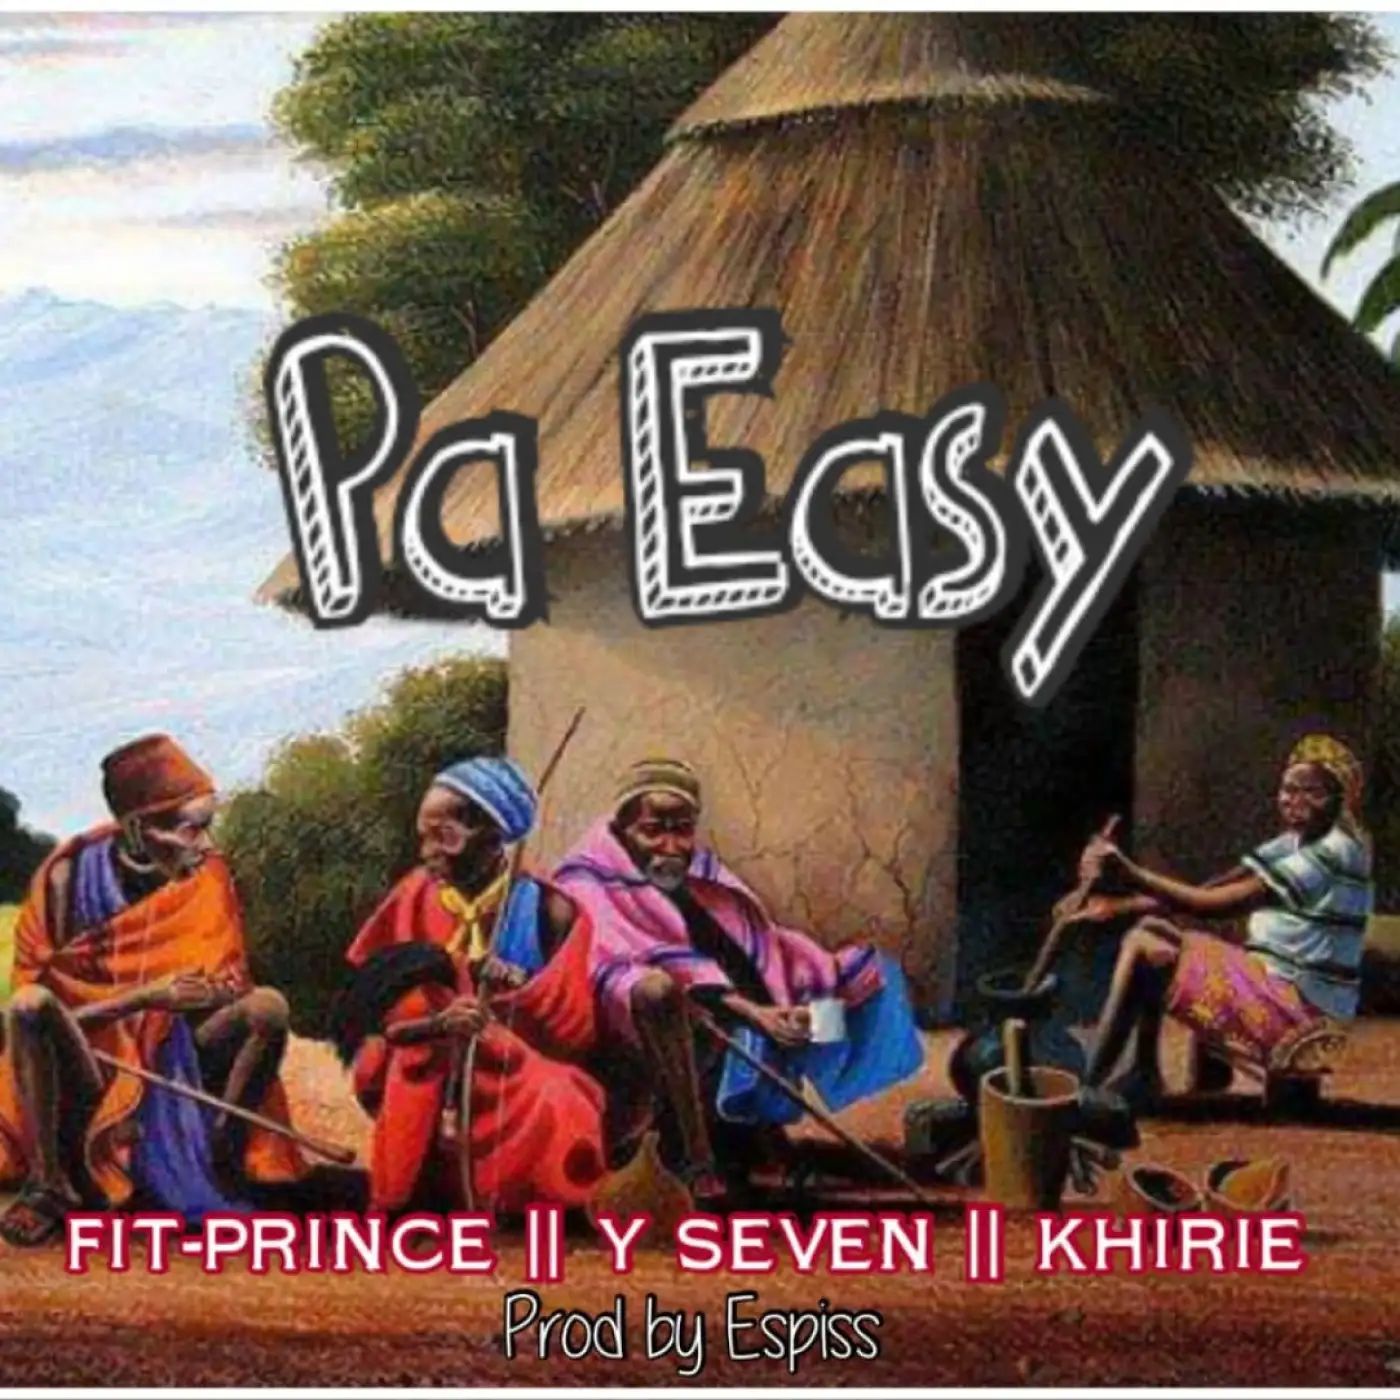 Fit Prince - Ndili Pa Easy Ft Y Seven & Khirie (Prod. Espiss)